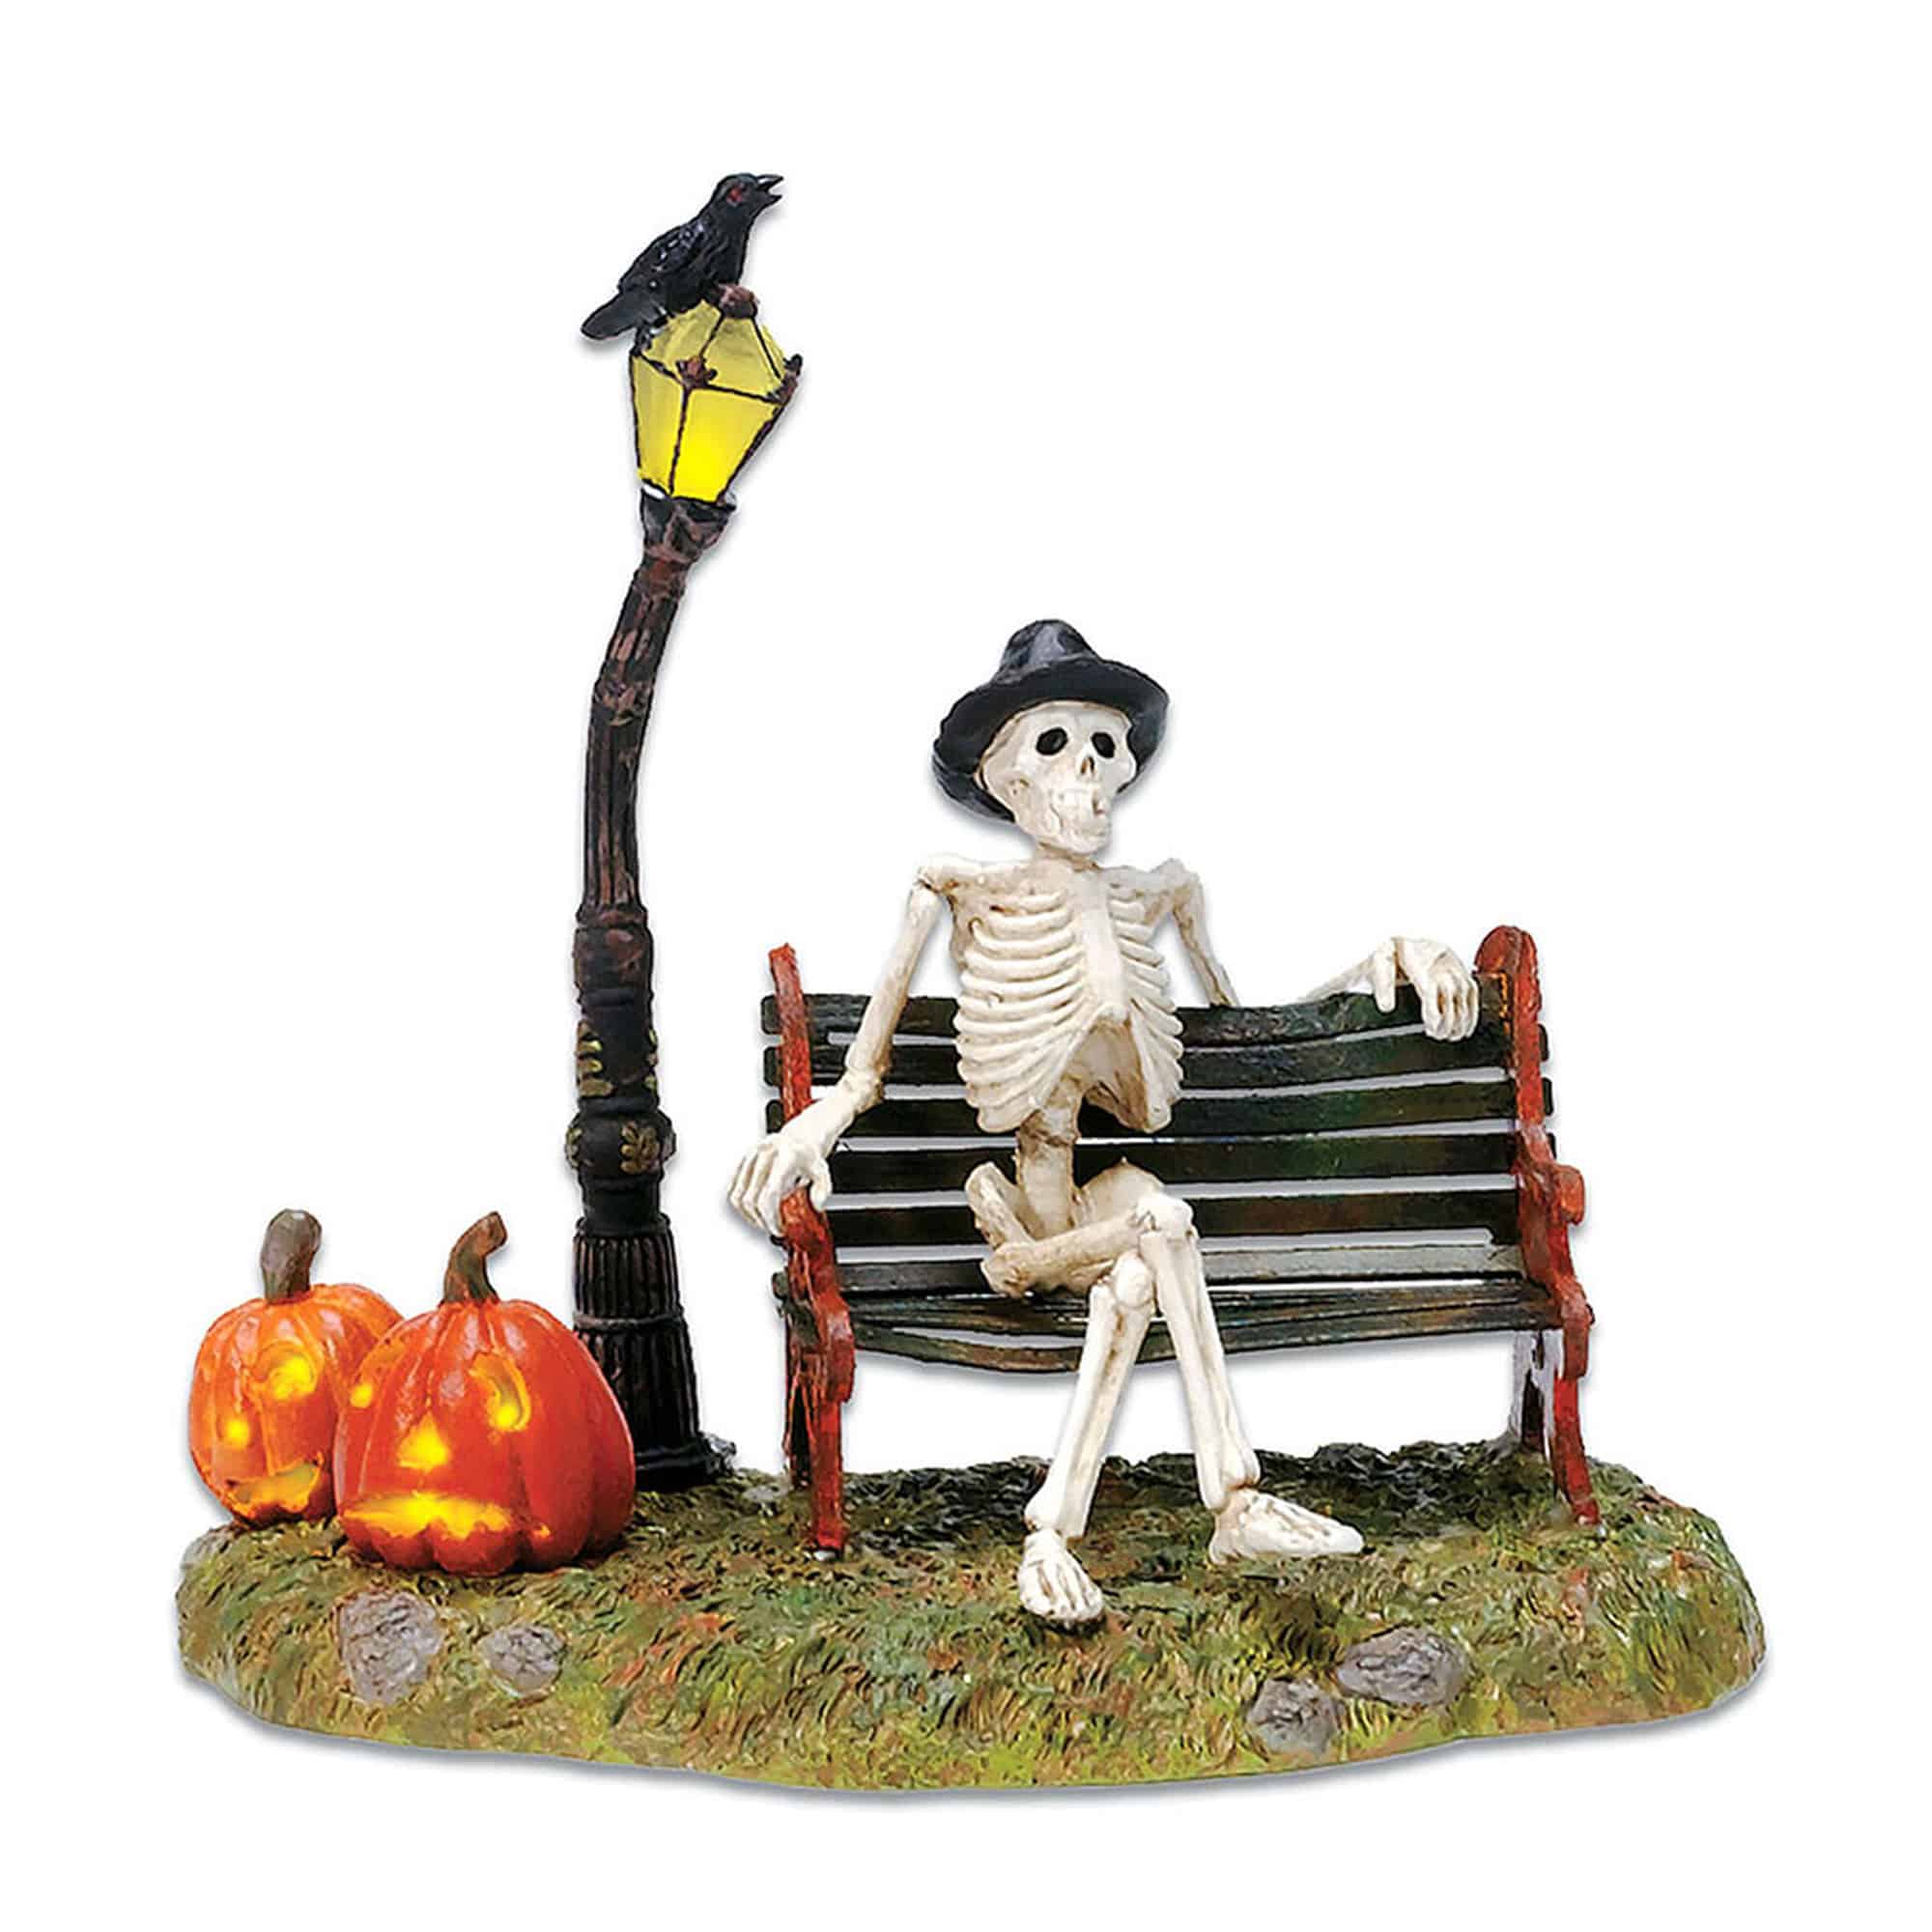 Department 56 56.53146 Accessories for Village Collections Halloween Resting My Bones Figurine, 4.75 inch, Multicolor